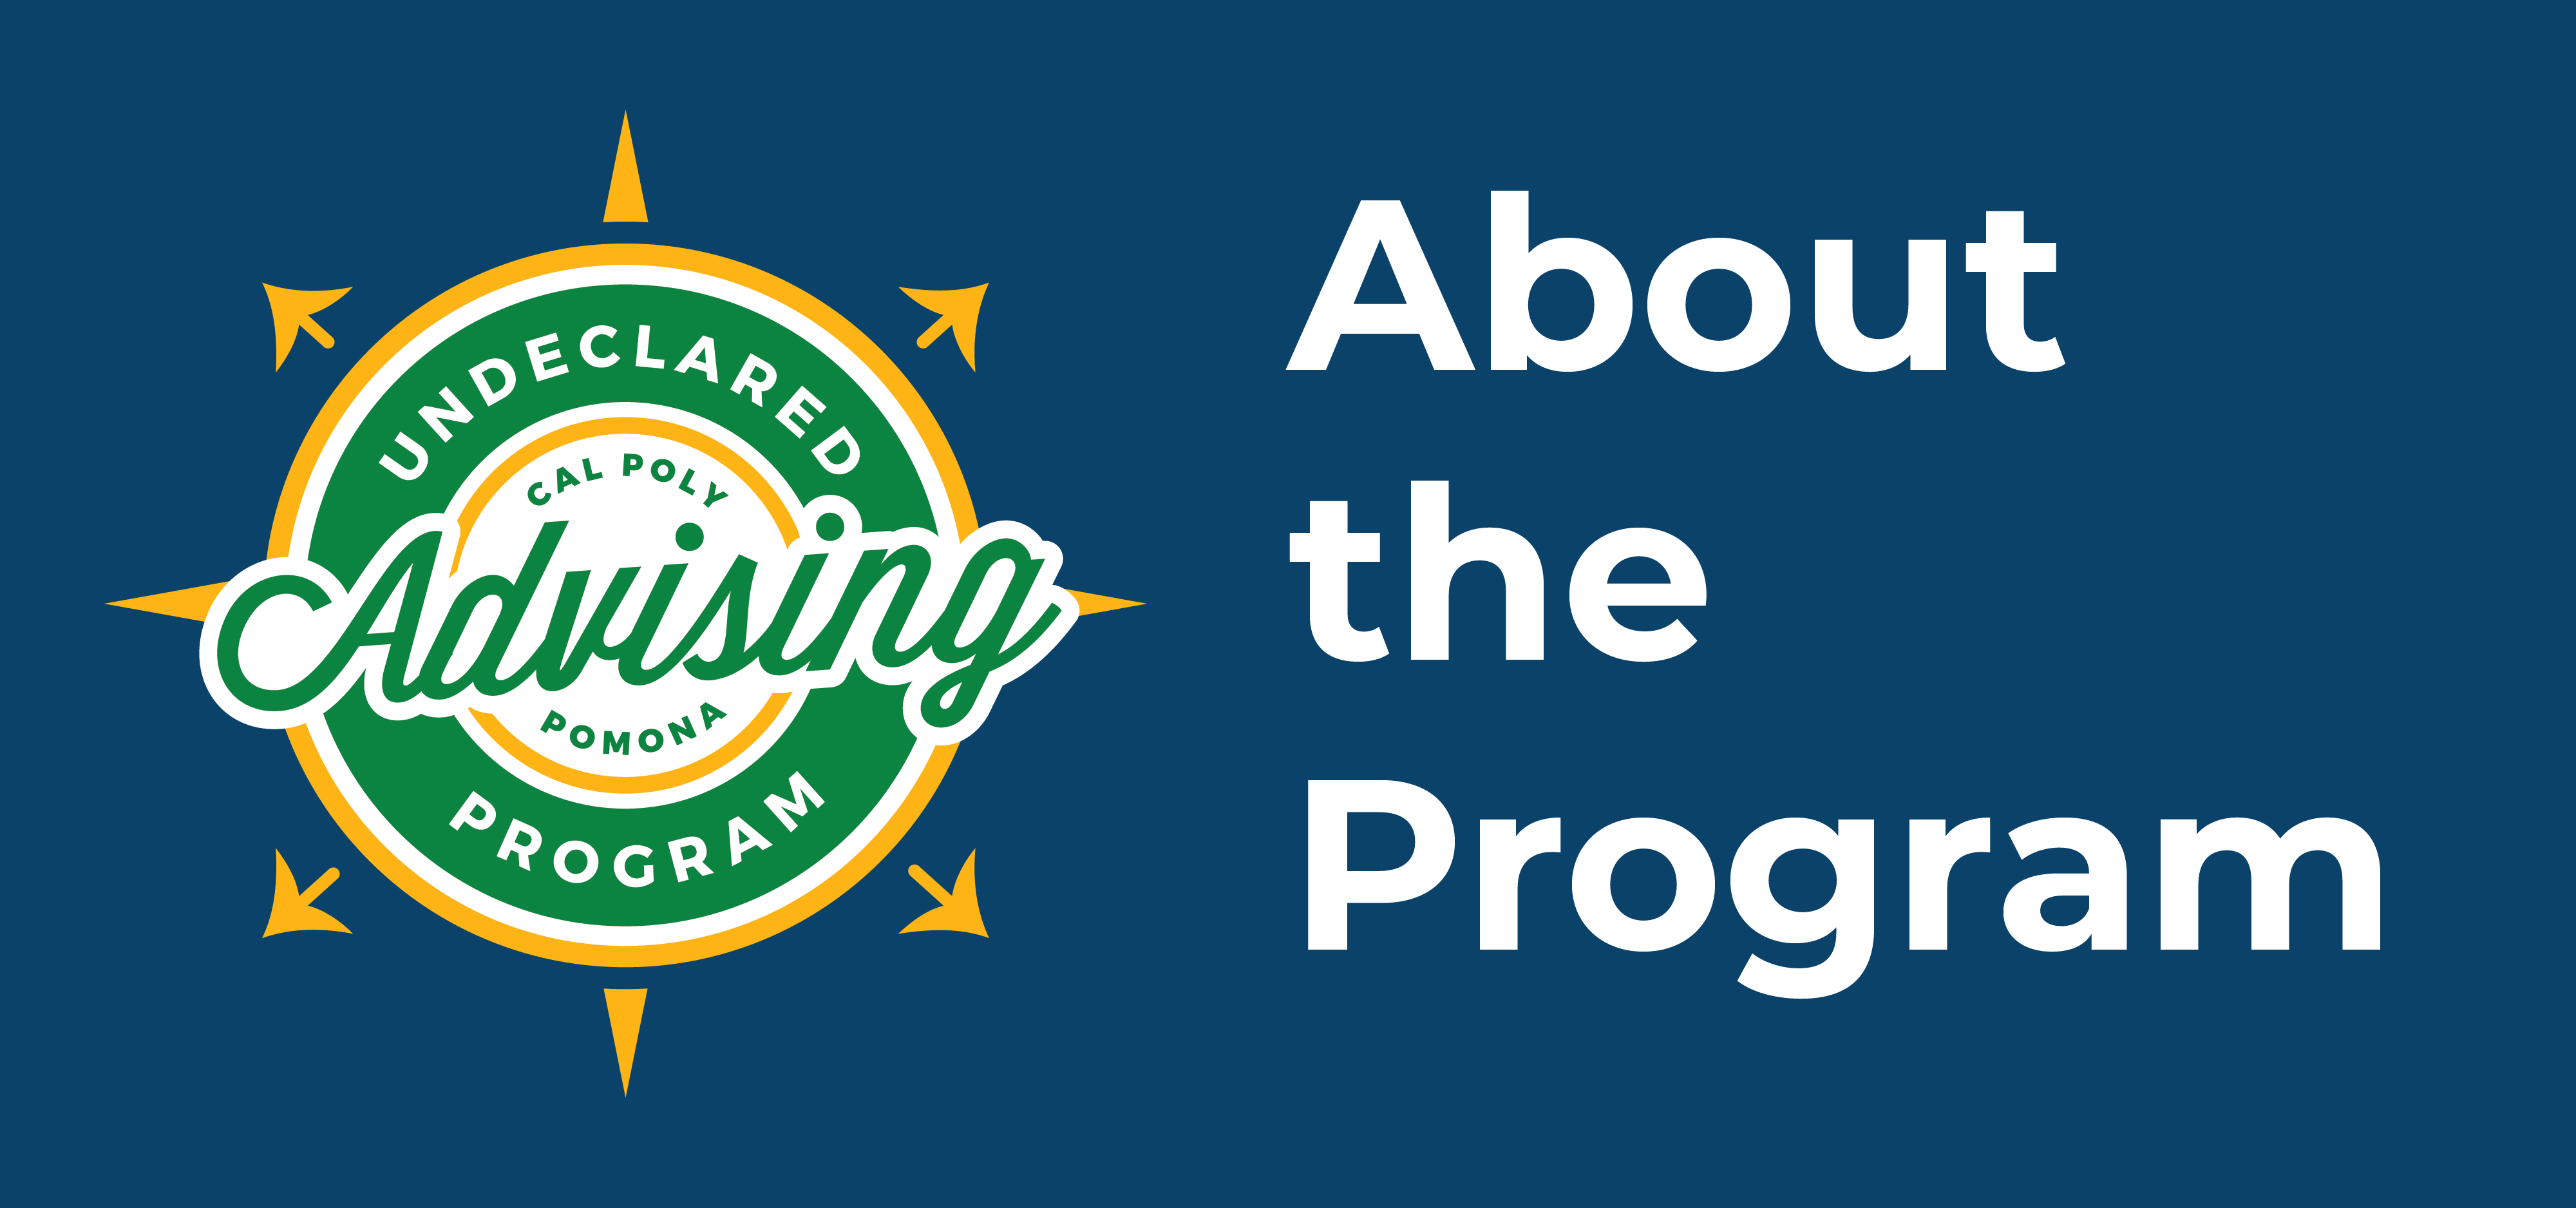 About the Program with Undeclared Advising Logo